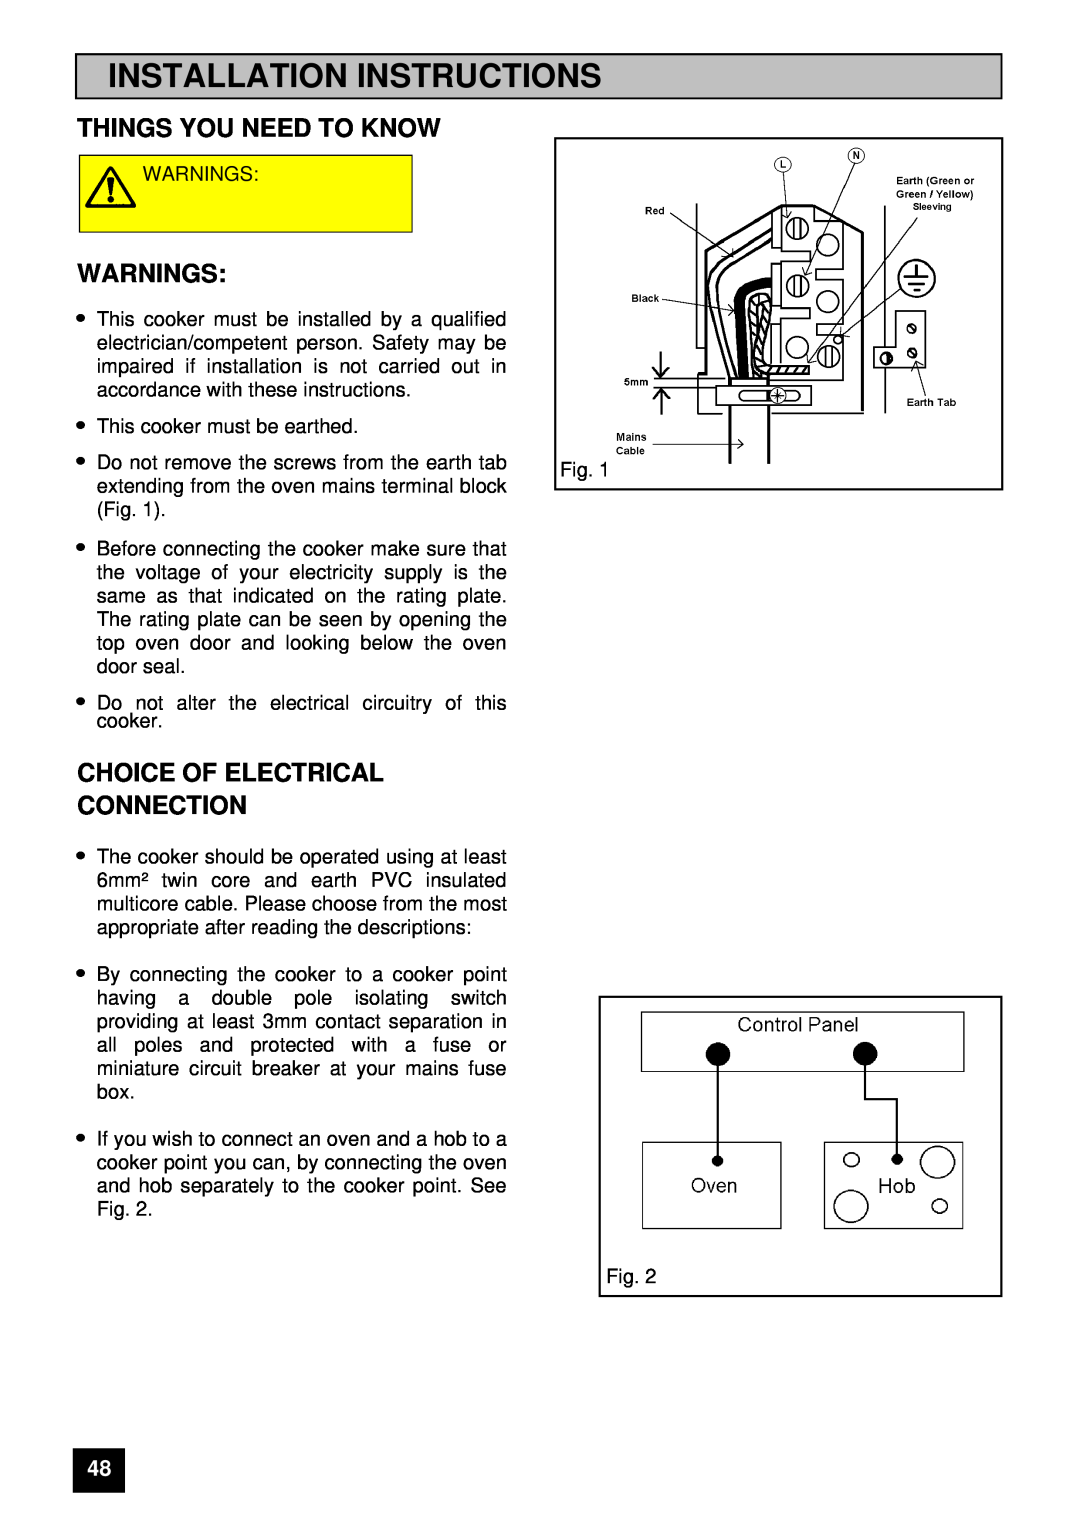 Tricity Bendix E 750 Installation Instructions, Things You Need To Know, Warnings, Choice Of Electrical Connection 